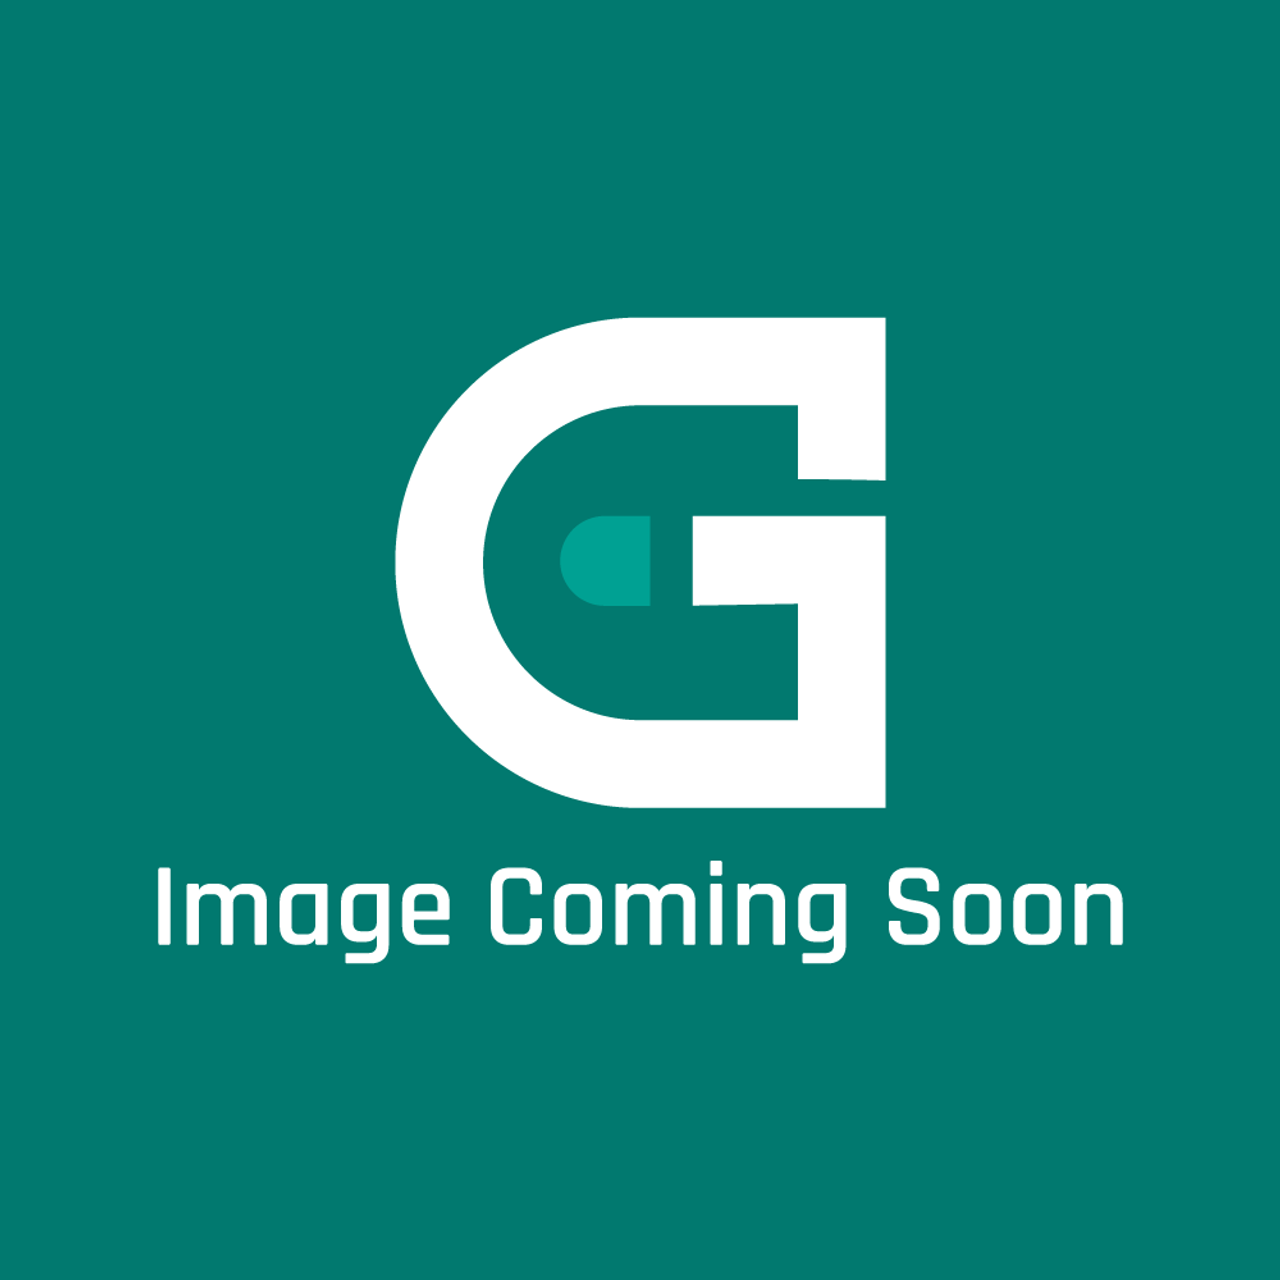 Anets B8050602C - Pg, Kit Wtr Sply Gpc18 - Image Coming Soon!